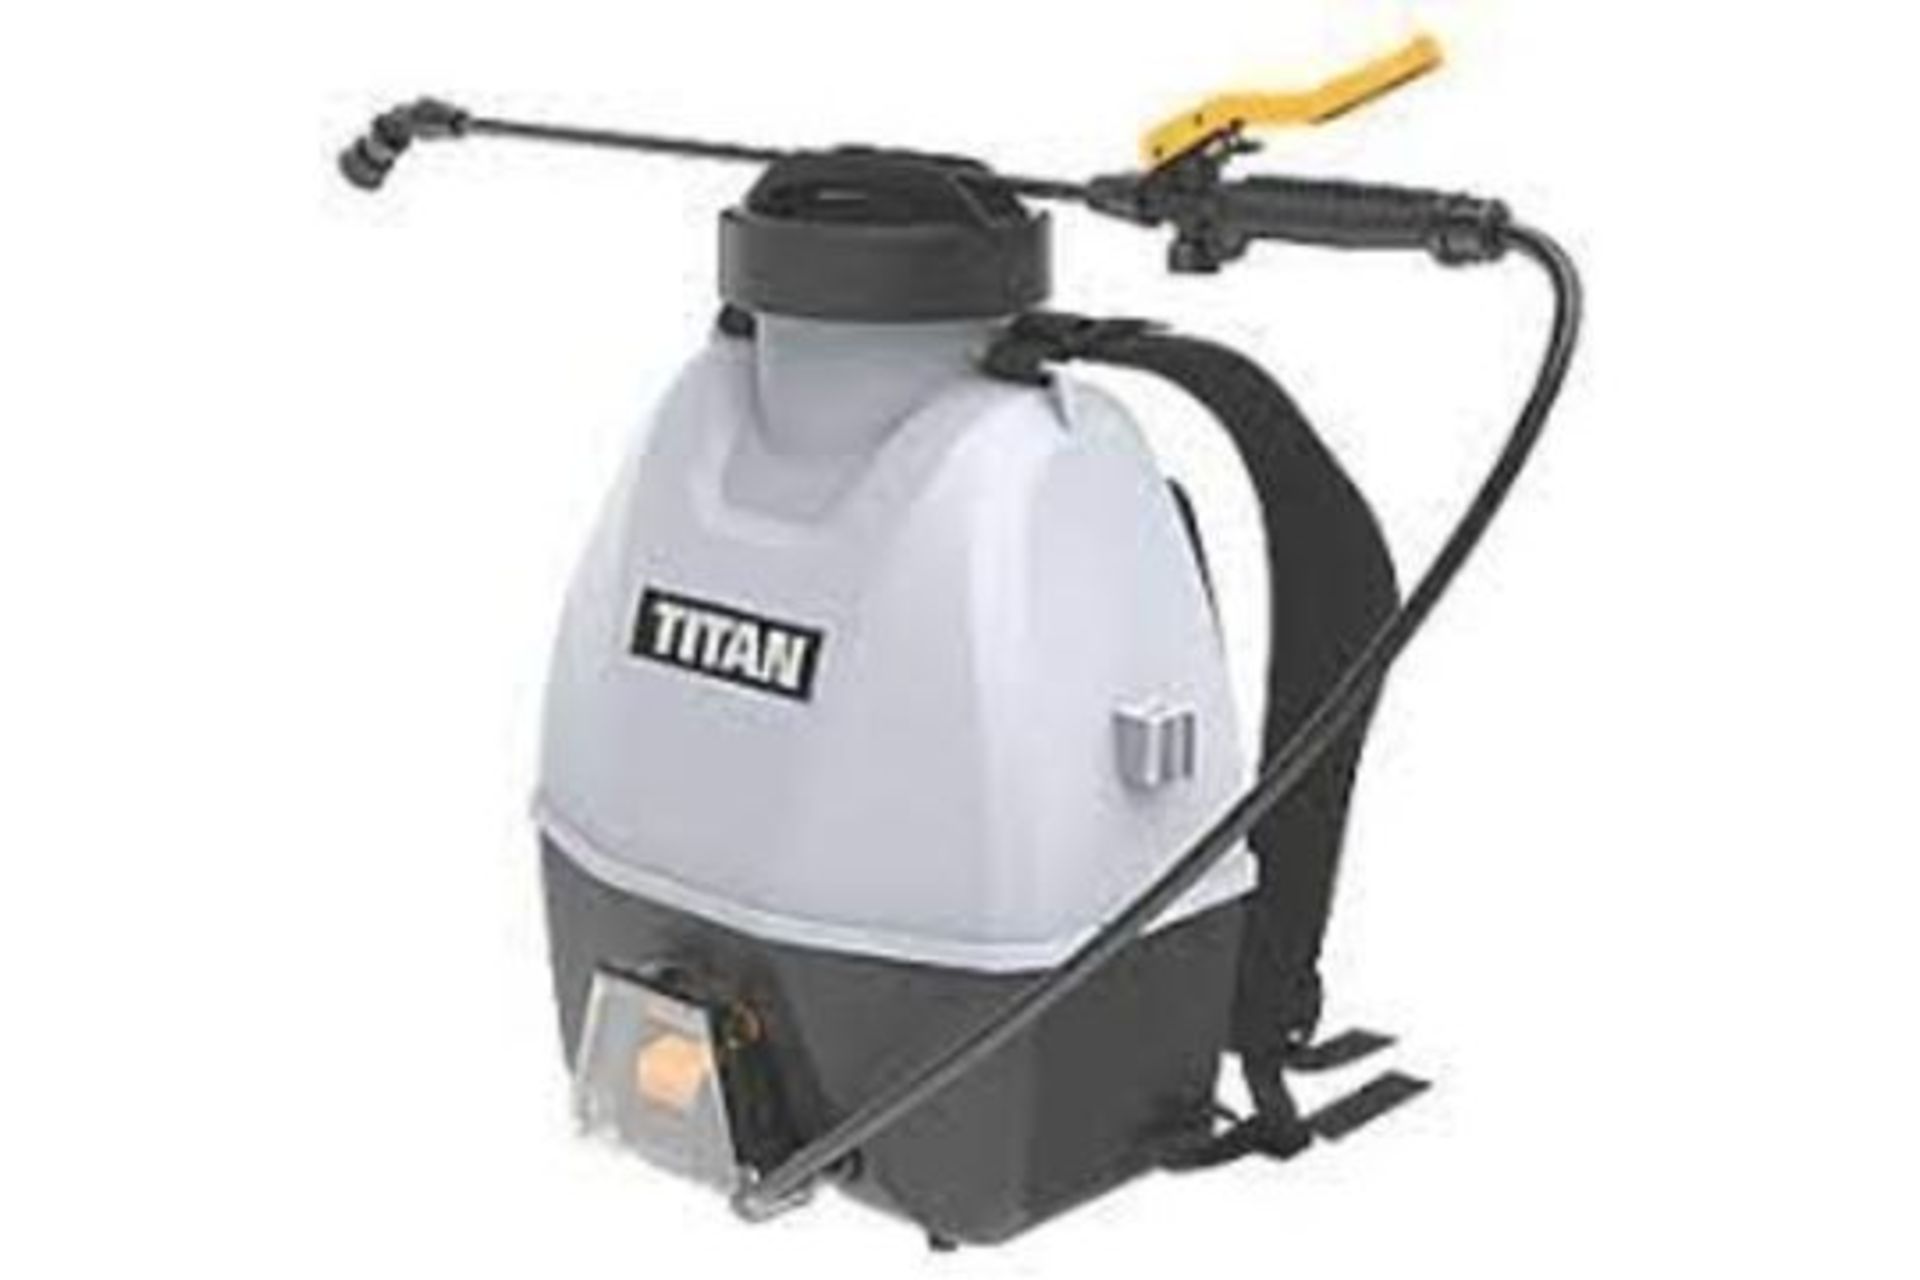 TITAN 18V 1 X 2.0AH LI-ION TXP CORDLESS BACKPACK SPRAYER 16LTR. - R14.9. For use with water-based